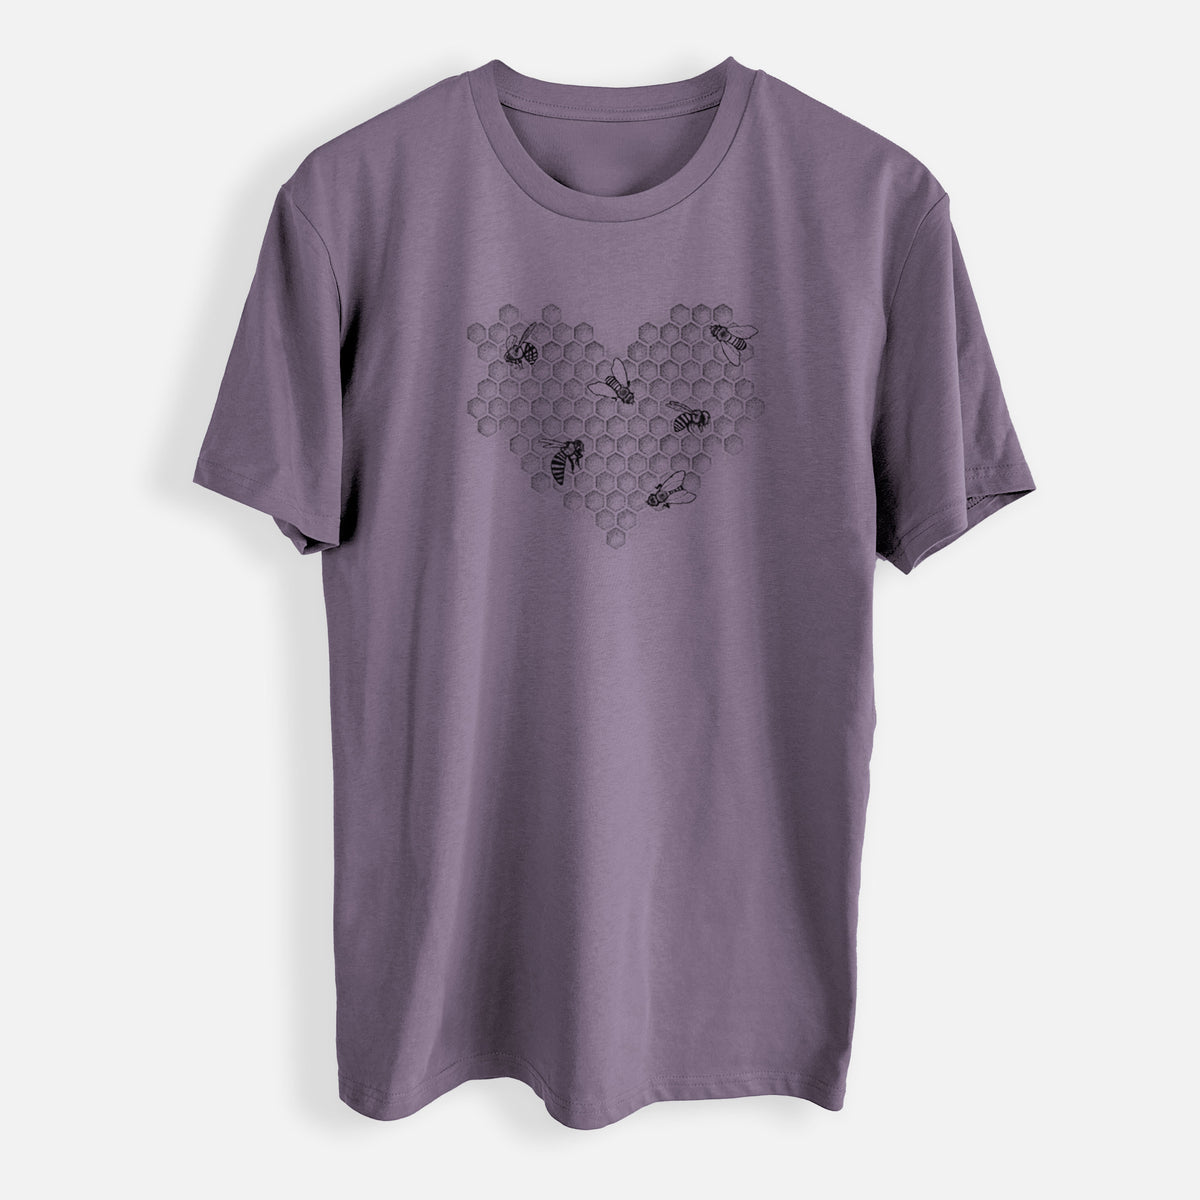 Honeycomb Heart with Bees - Mens Everyday Staple Tee